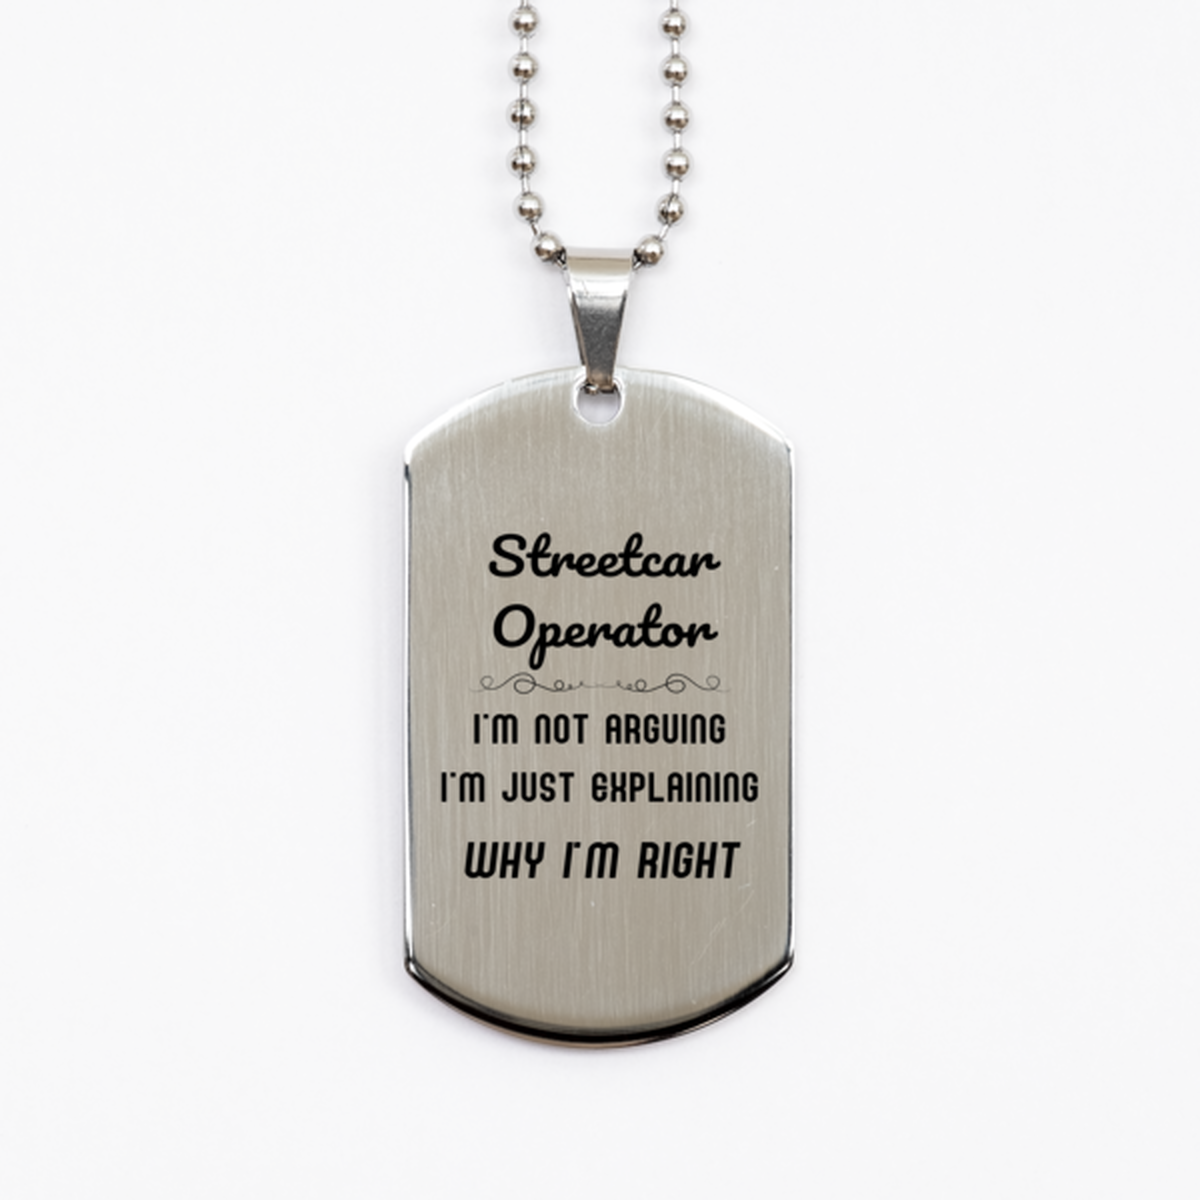 Streetcar Operator I'm not Arguing. I'm Just Explaining Why I'm RIGHT Silver Dog Tag, Funny Saying Quote Streetcar Operator Gifts For Streetcar Operator Graduation Birthday Christmas Gifts for Men Women Coworker